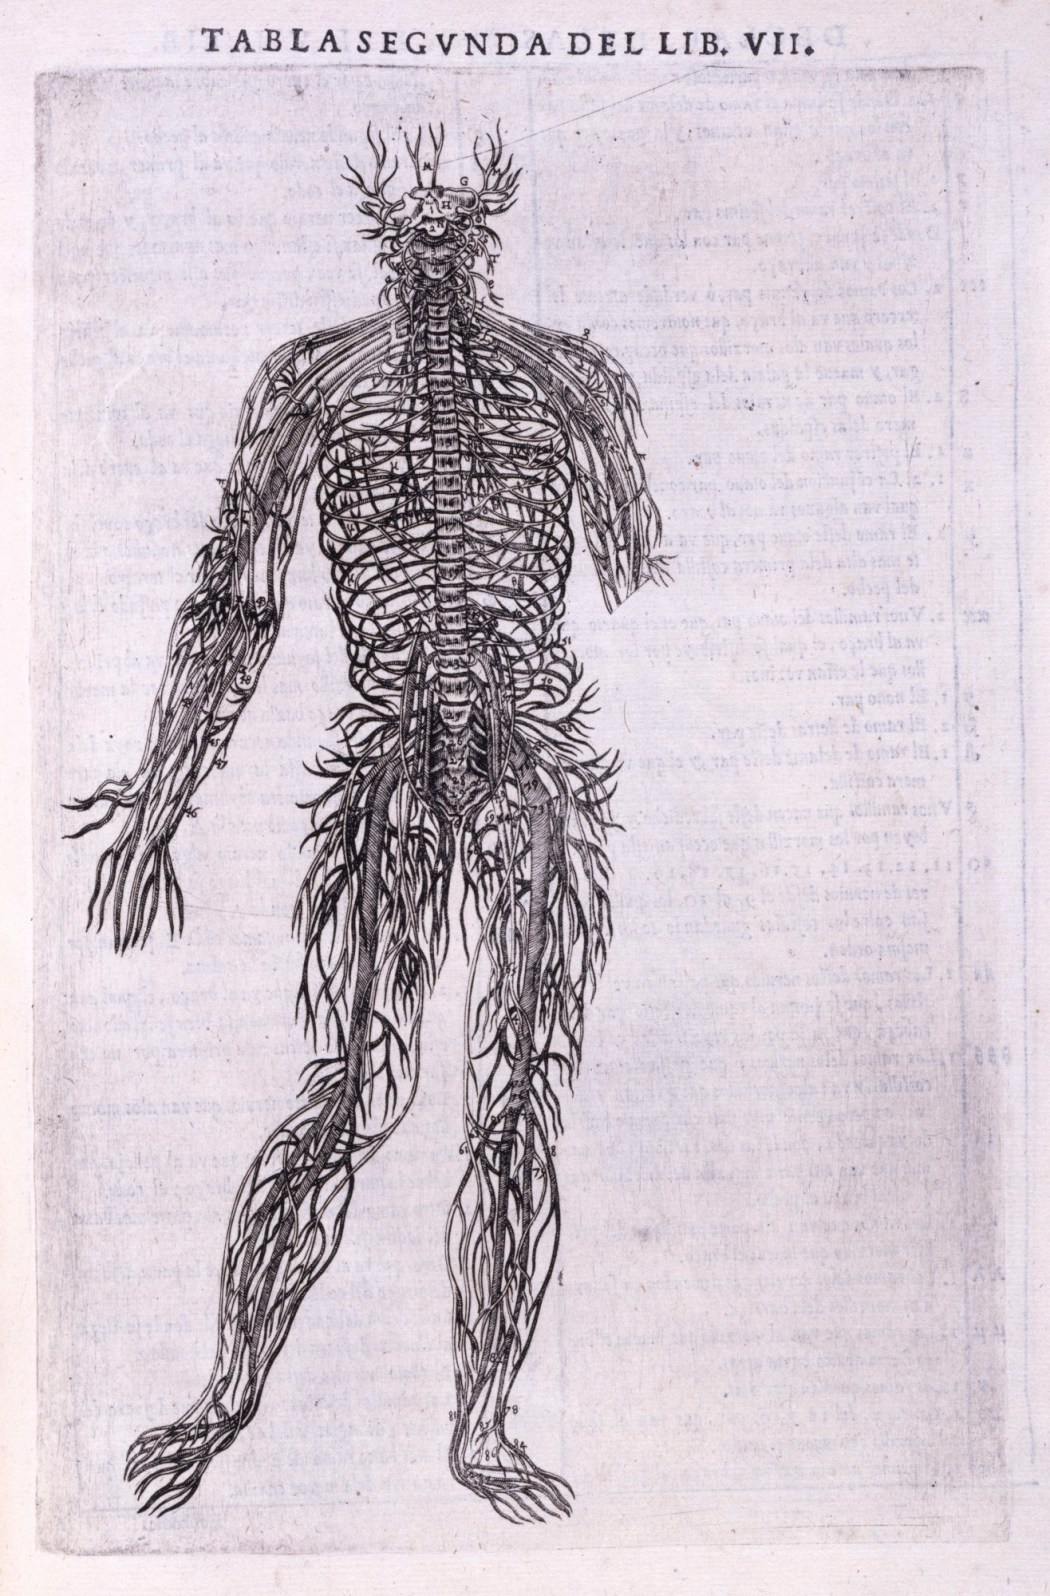 Andreas Vesalius and De Fabrica – Circulating Now from the NLM Historical  Collections